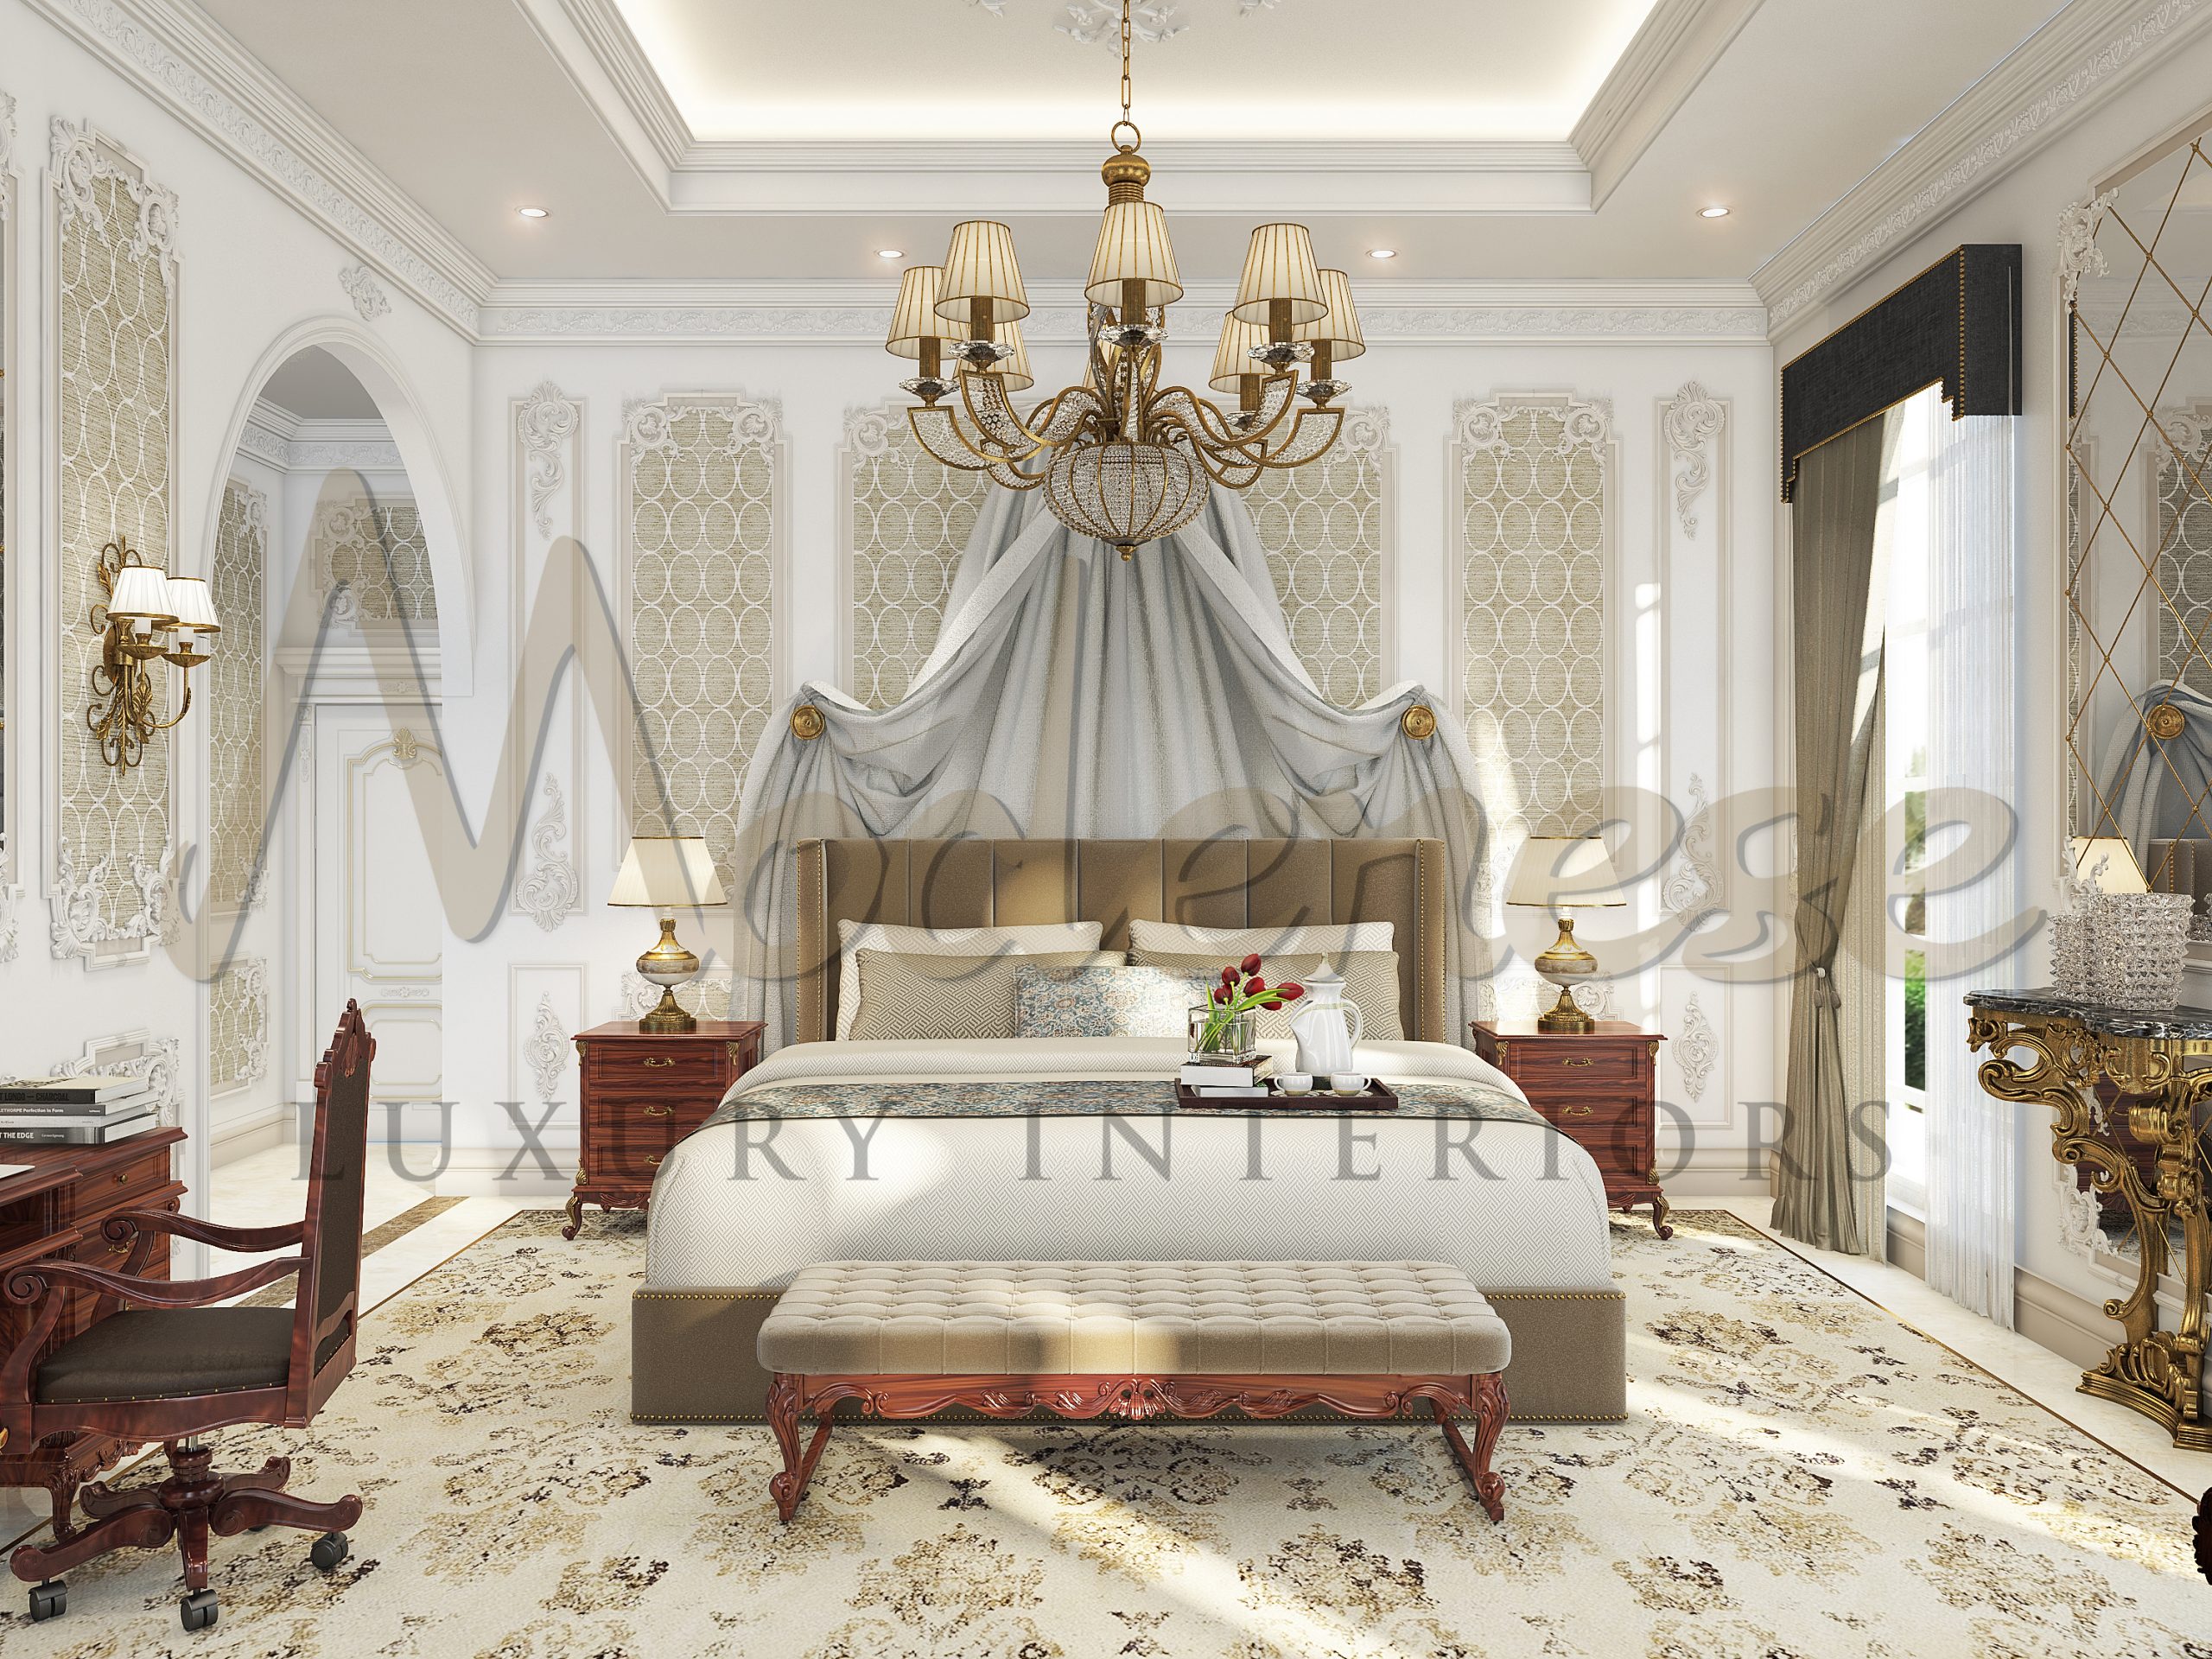 Gorgeous Bedroom Design For Luxurious Mansion In Morocco